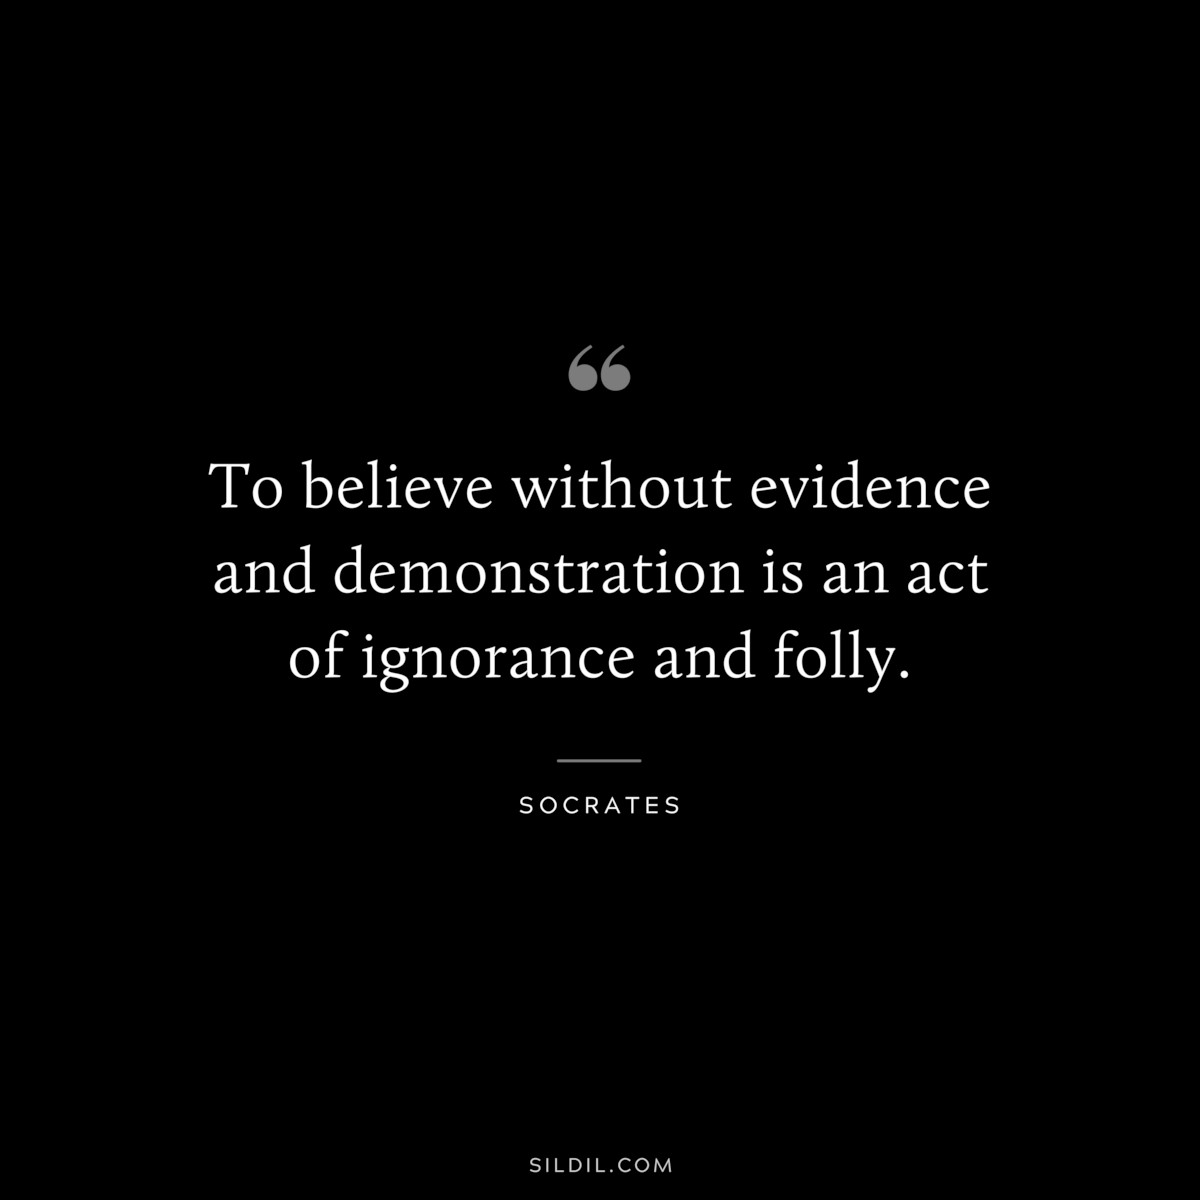 To believe without evidence and demonstration is an act of ignorance and folly. ― Socrates